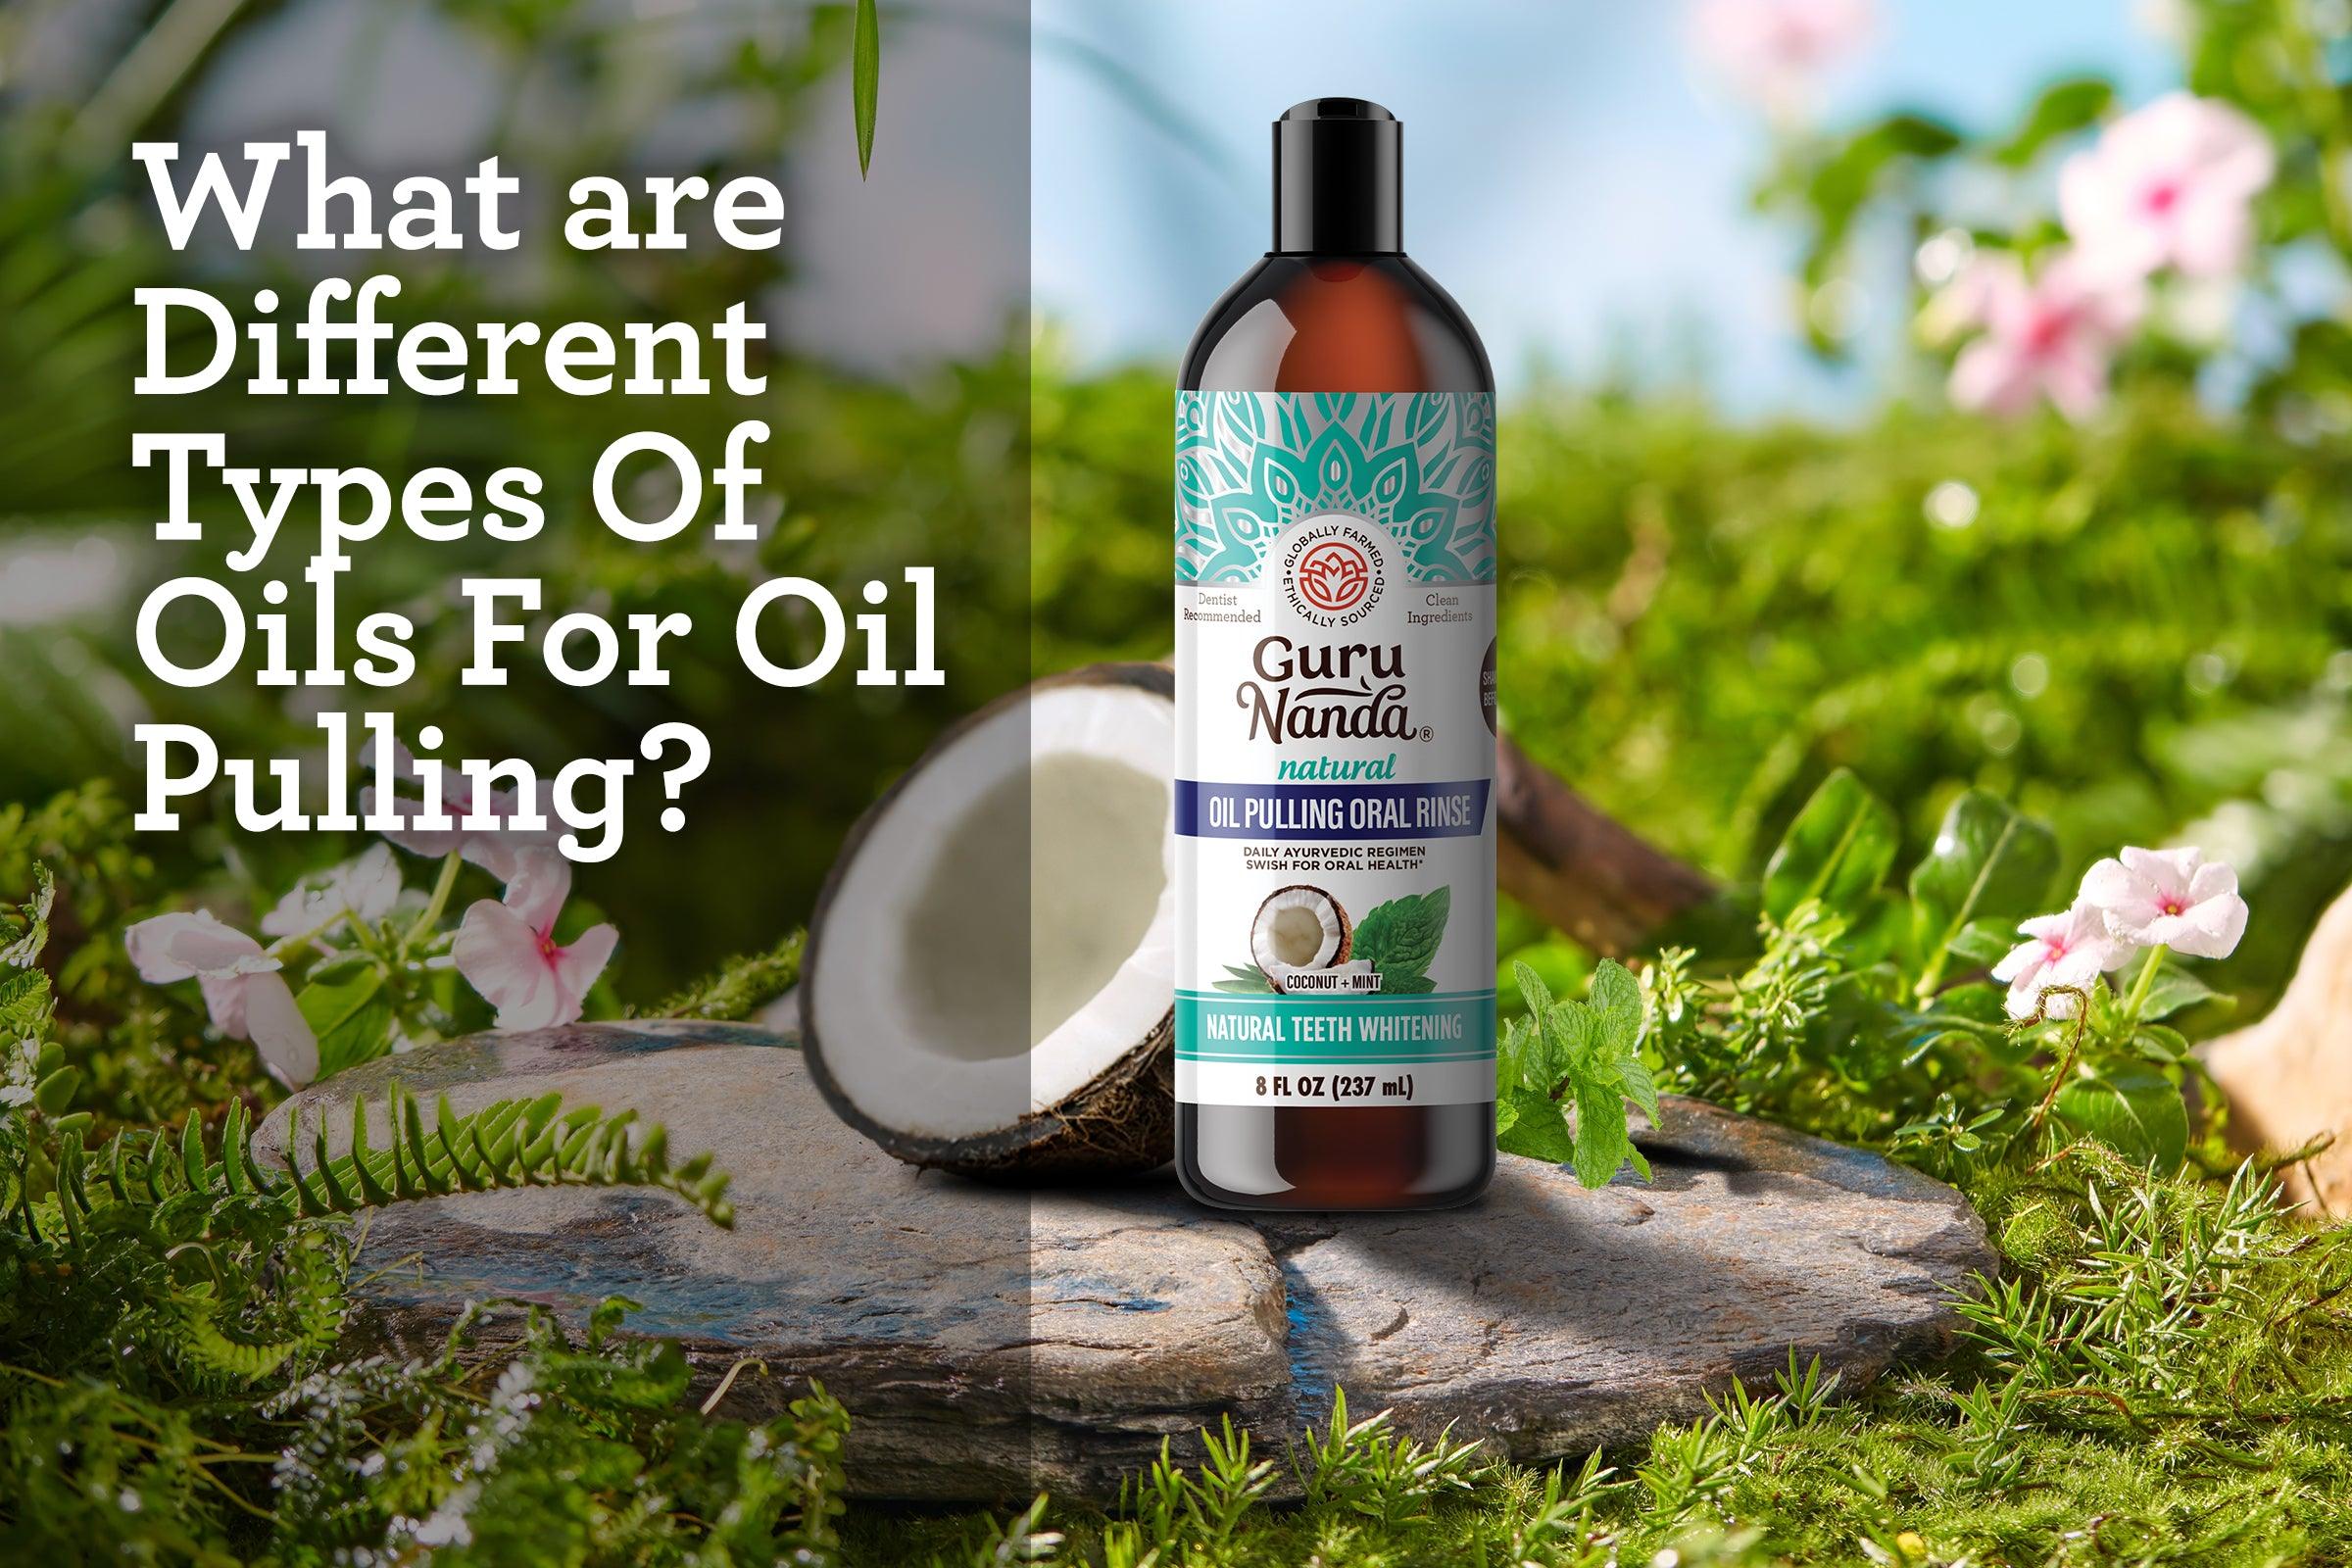 What are Different Types Of Oils For Oil Pulling? - GuruNanda